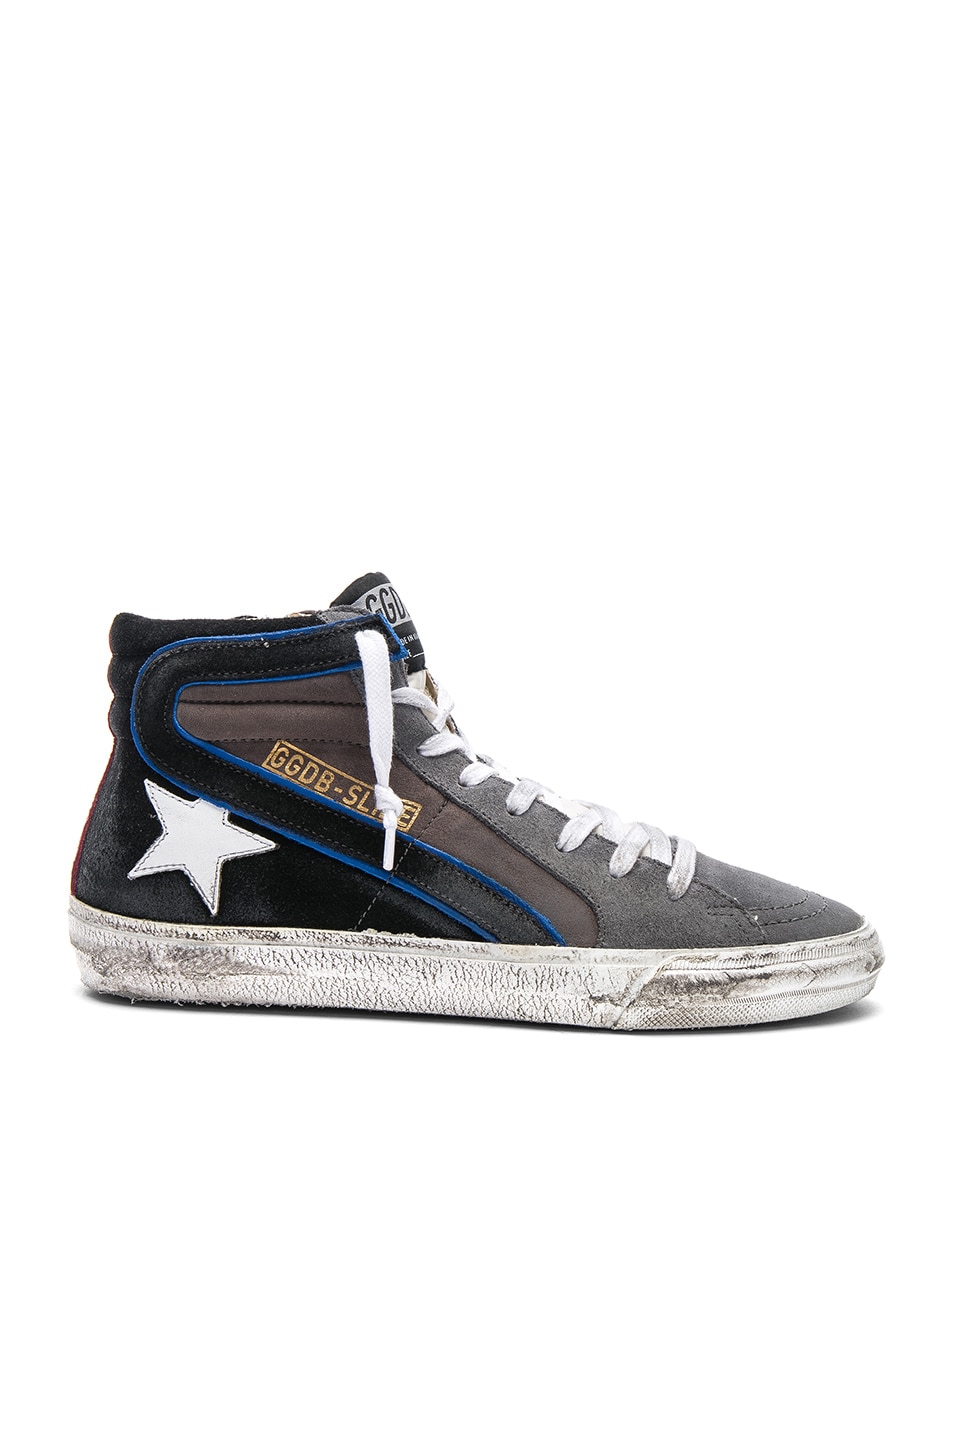 Image 1 of Golden Goose Nubuck Leather Slide Sneakers in Lavagna & White